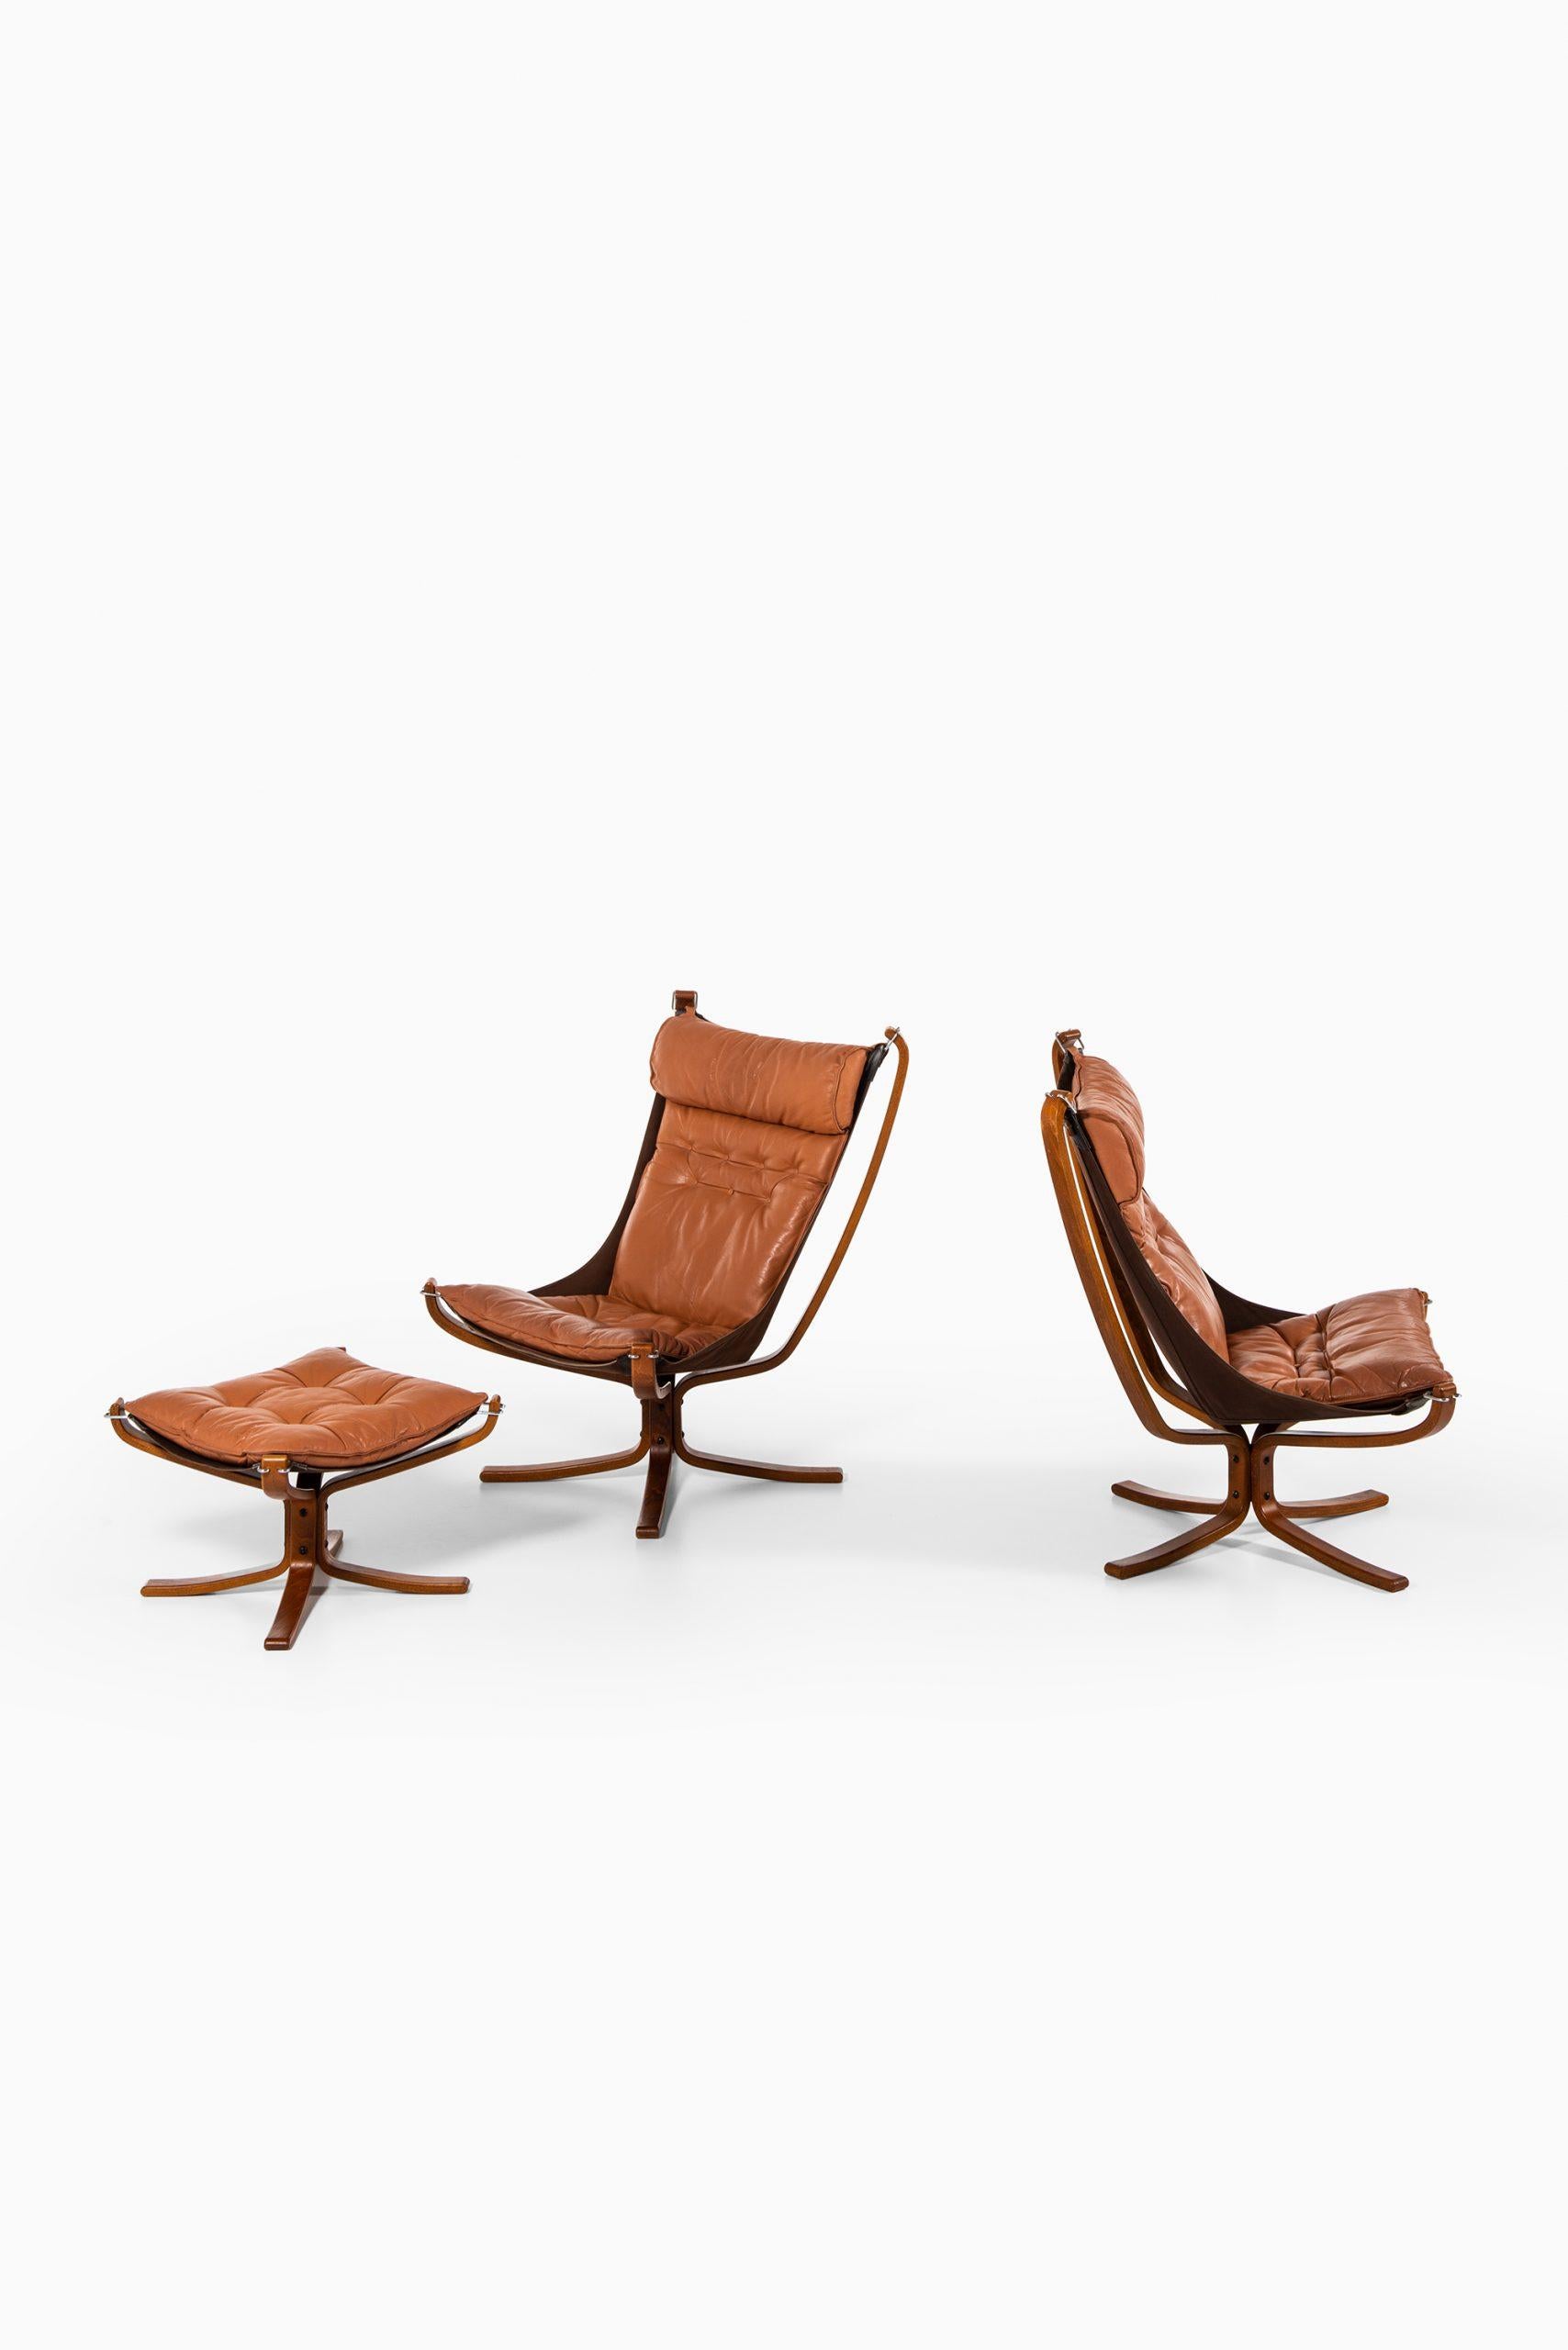 A pair of easy chairs and stool model Falcon designed by Sigurd Resell. Produced by Vatne möbler in Norway.